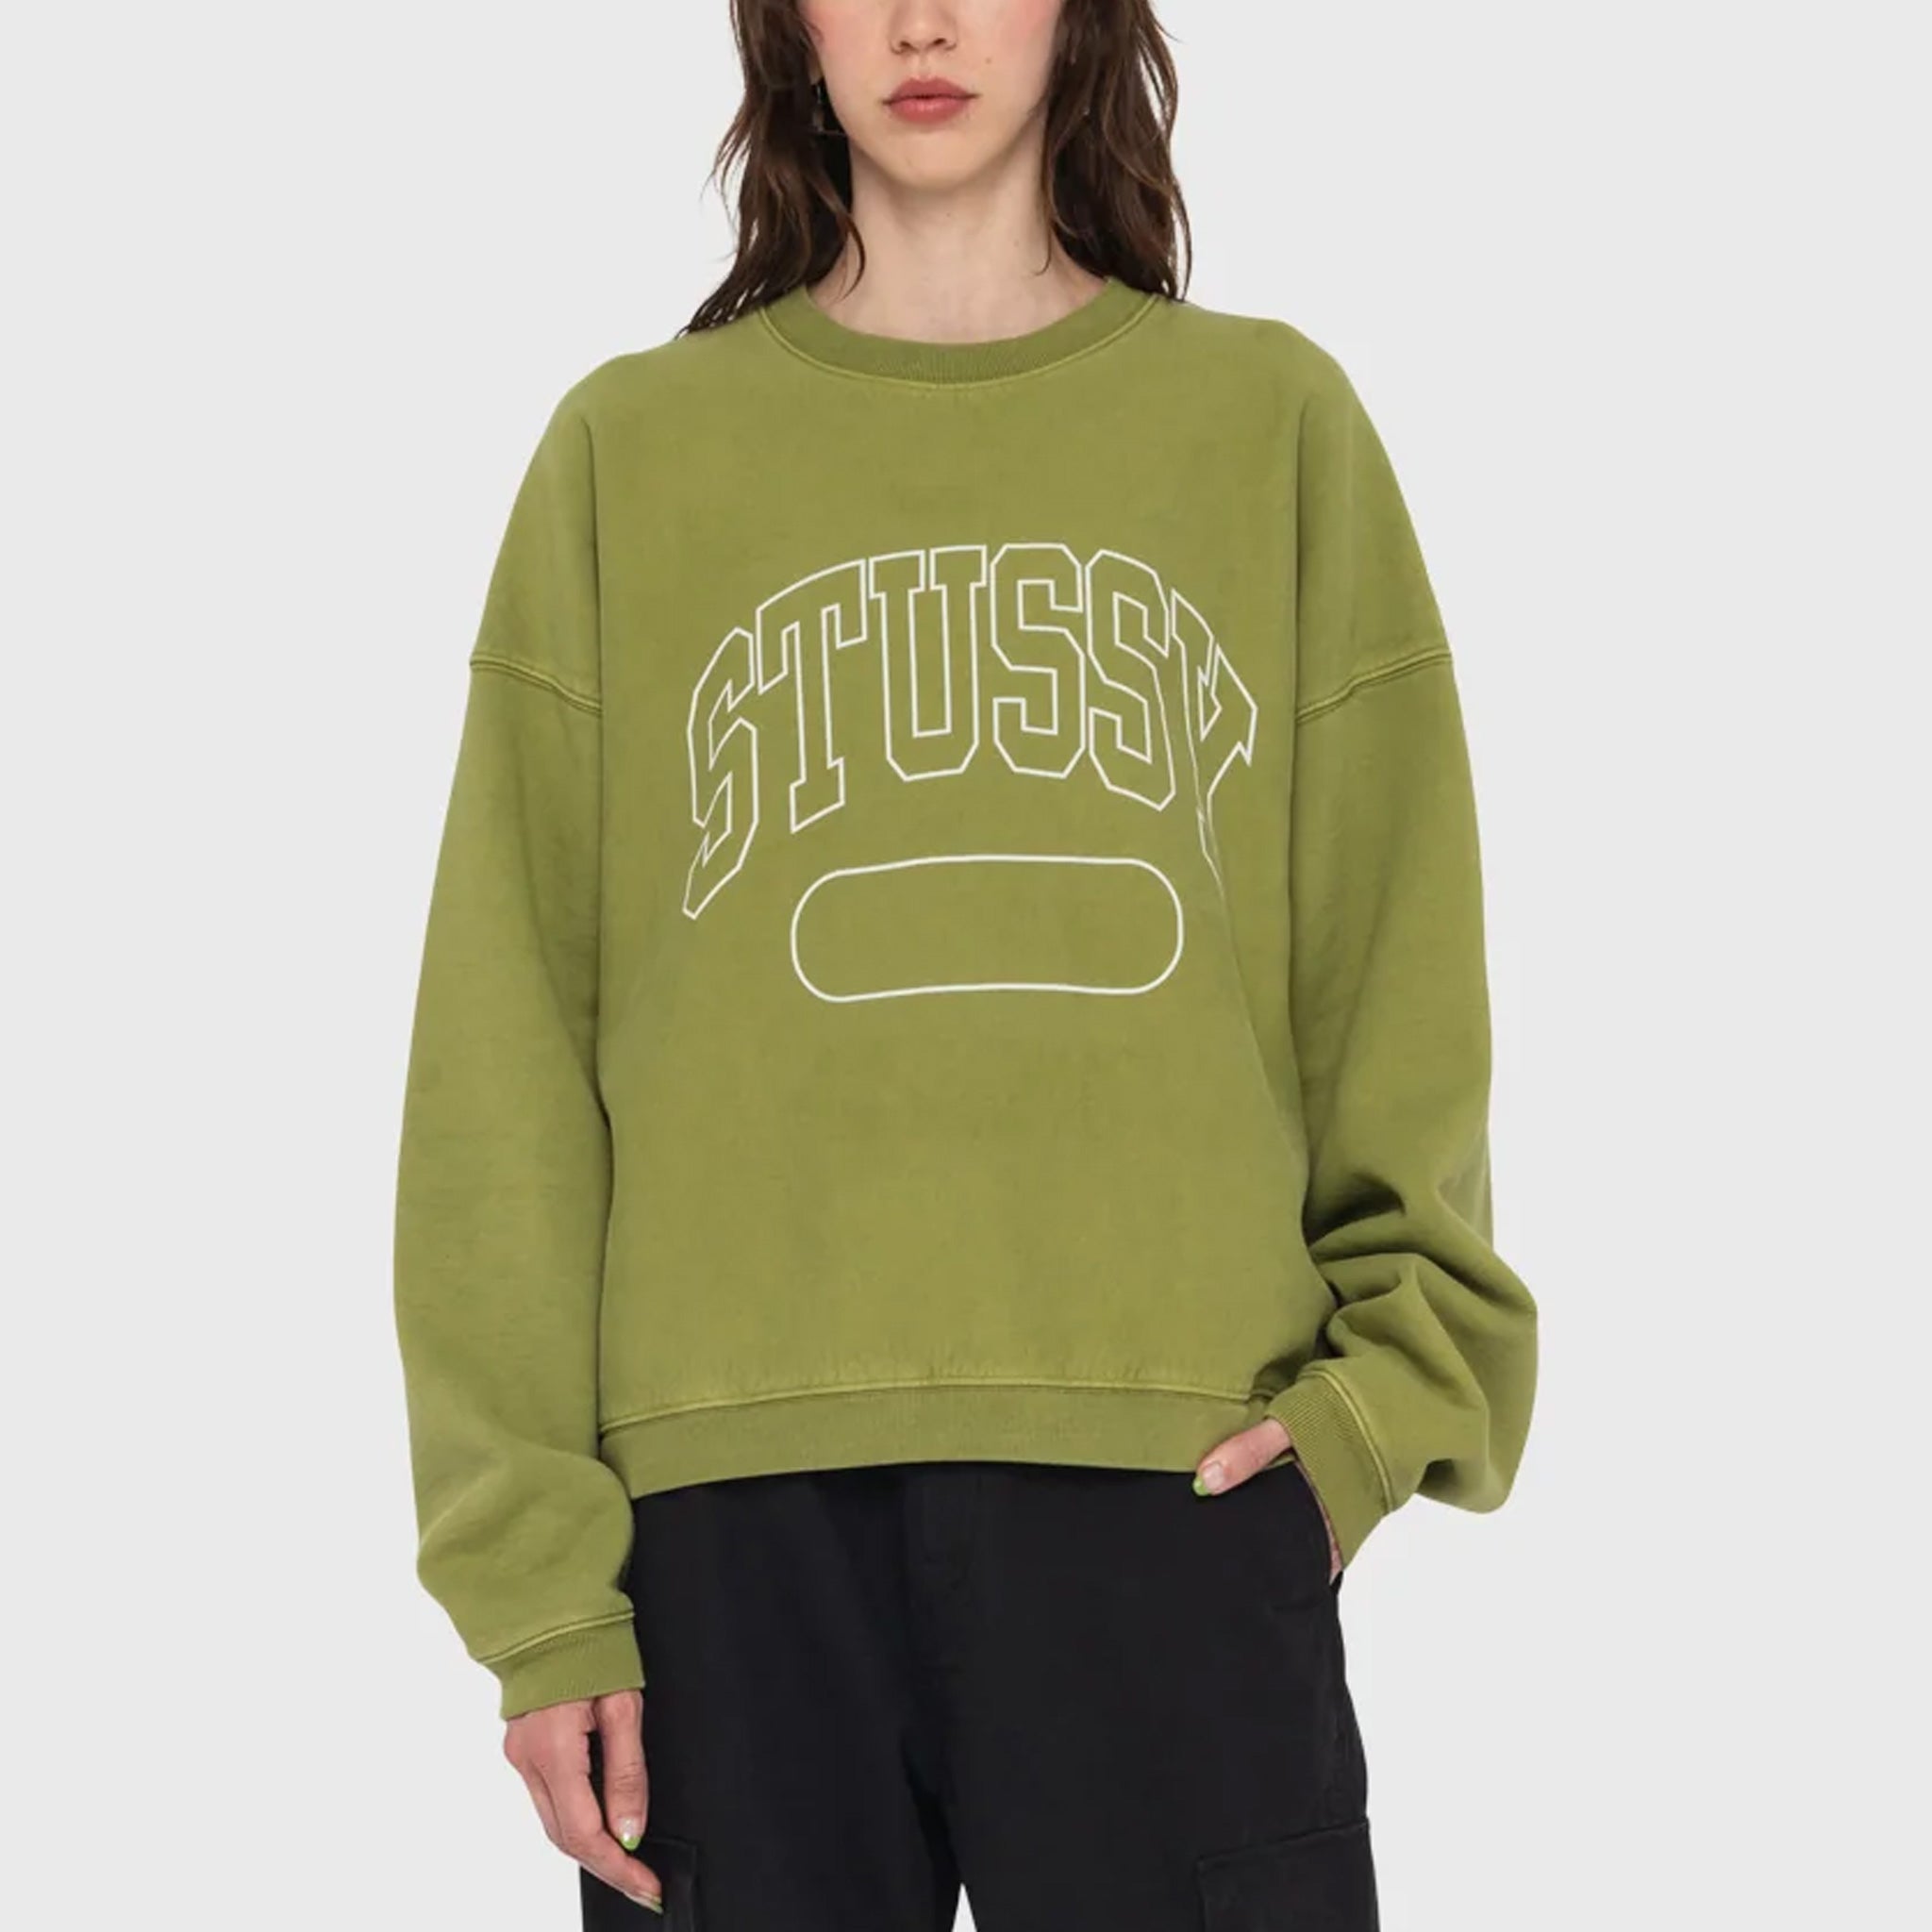 Front photo of model wearing a oversized stussy crewneck sweatshirt in a light green color.